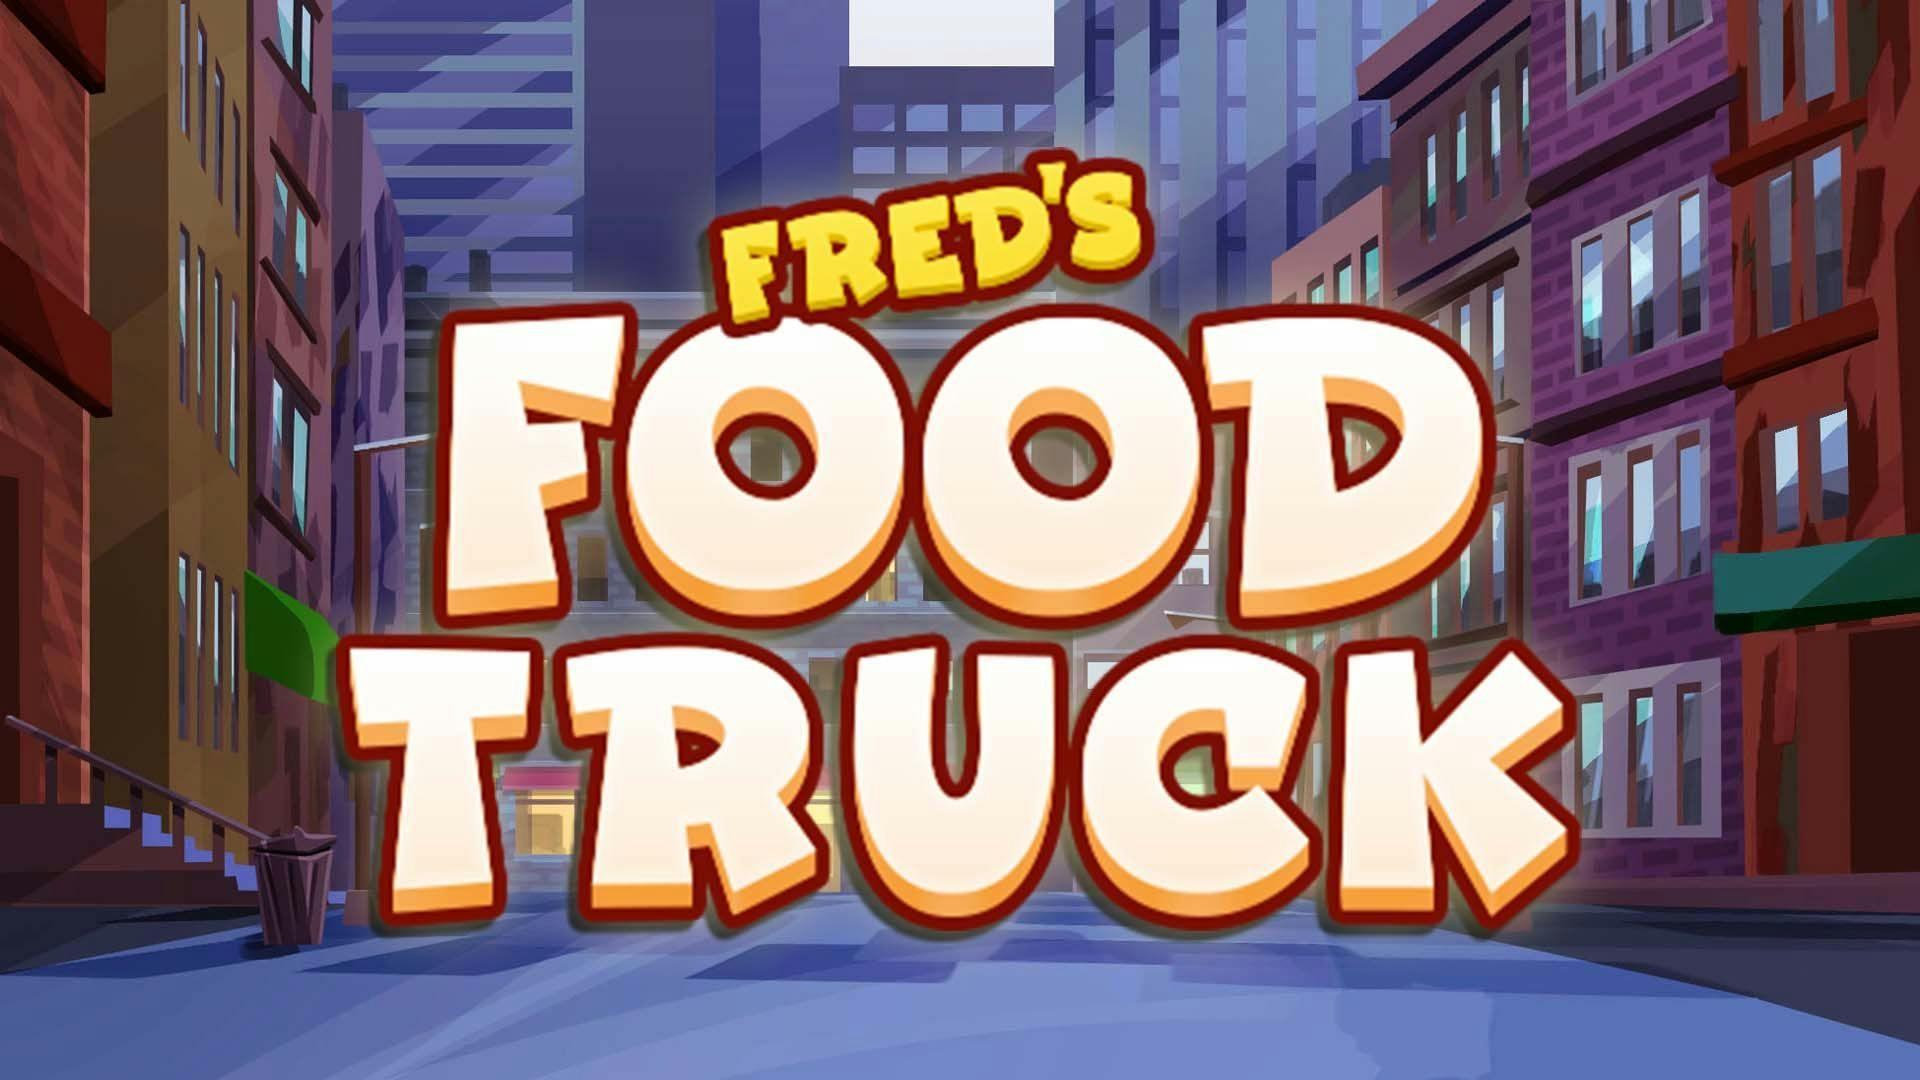 Fred's Food Truck Slot Machine Online Free Game Play